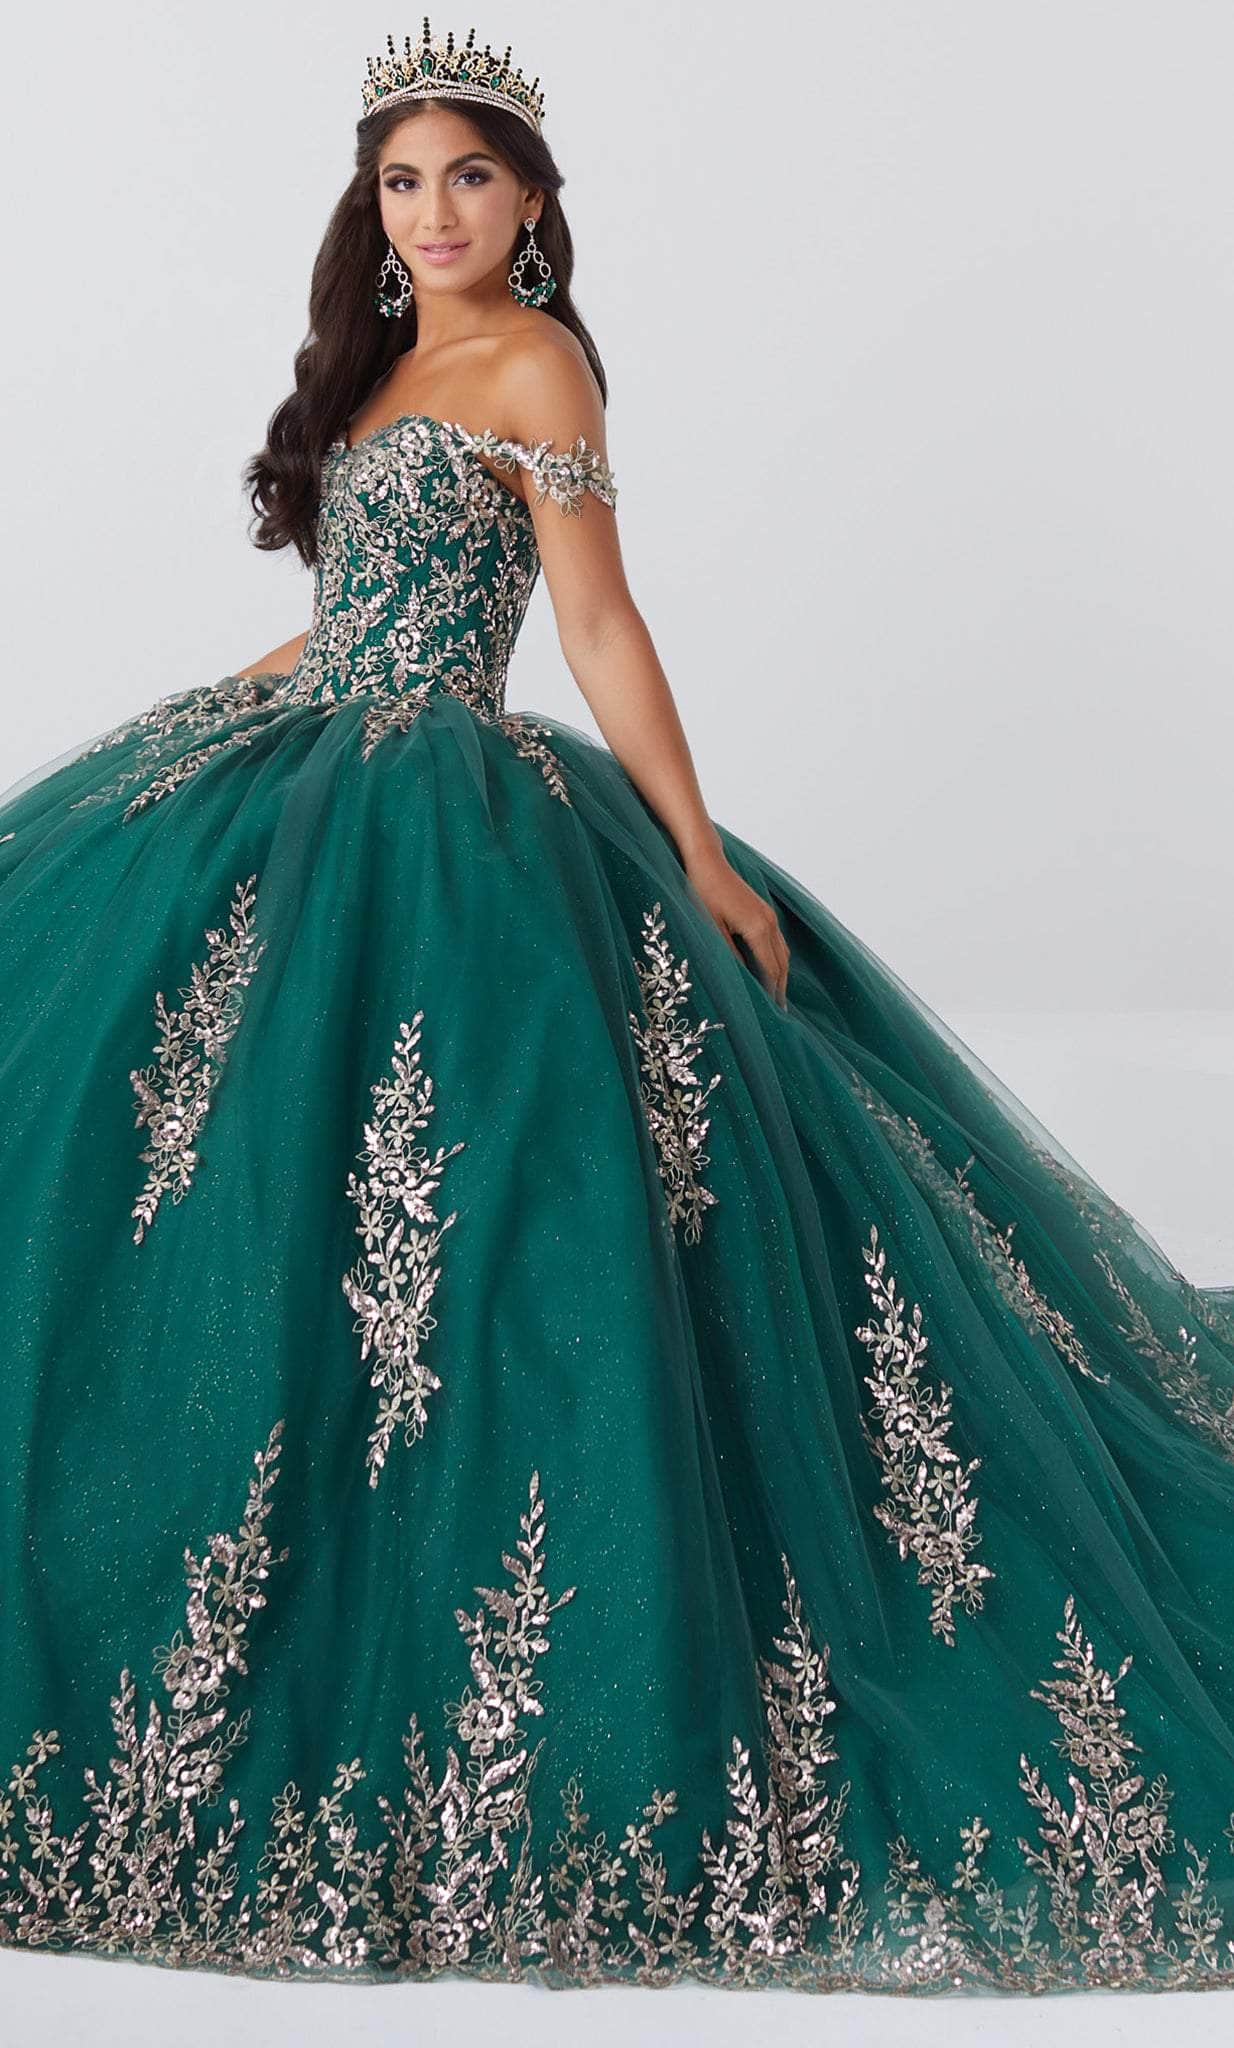 Image of Fiesta Gowns 56466 - Embellished Glittery Tulle Voluminous Dress